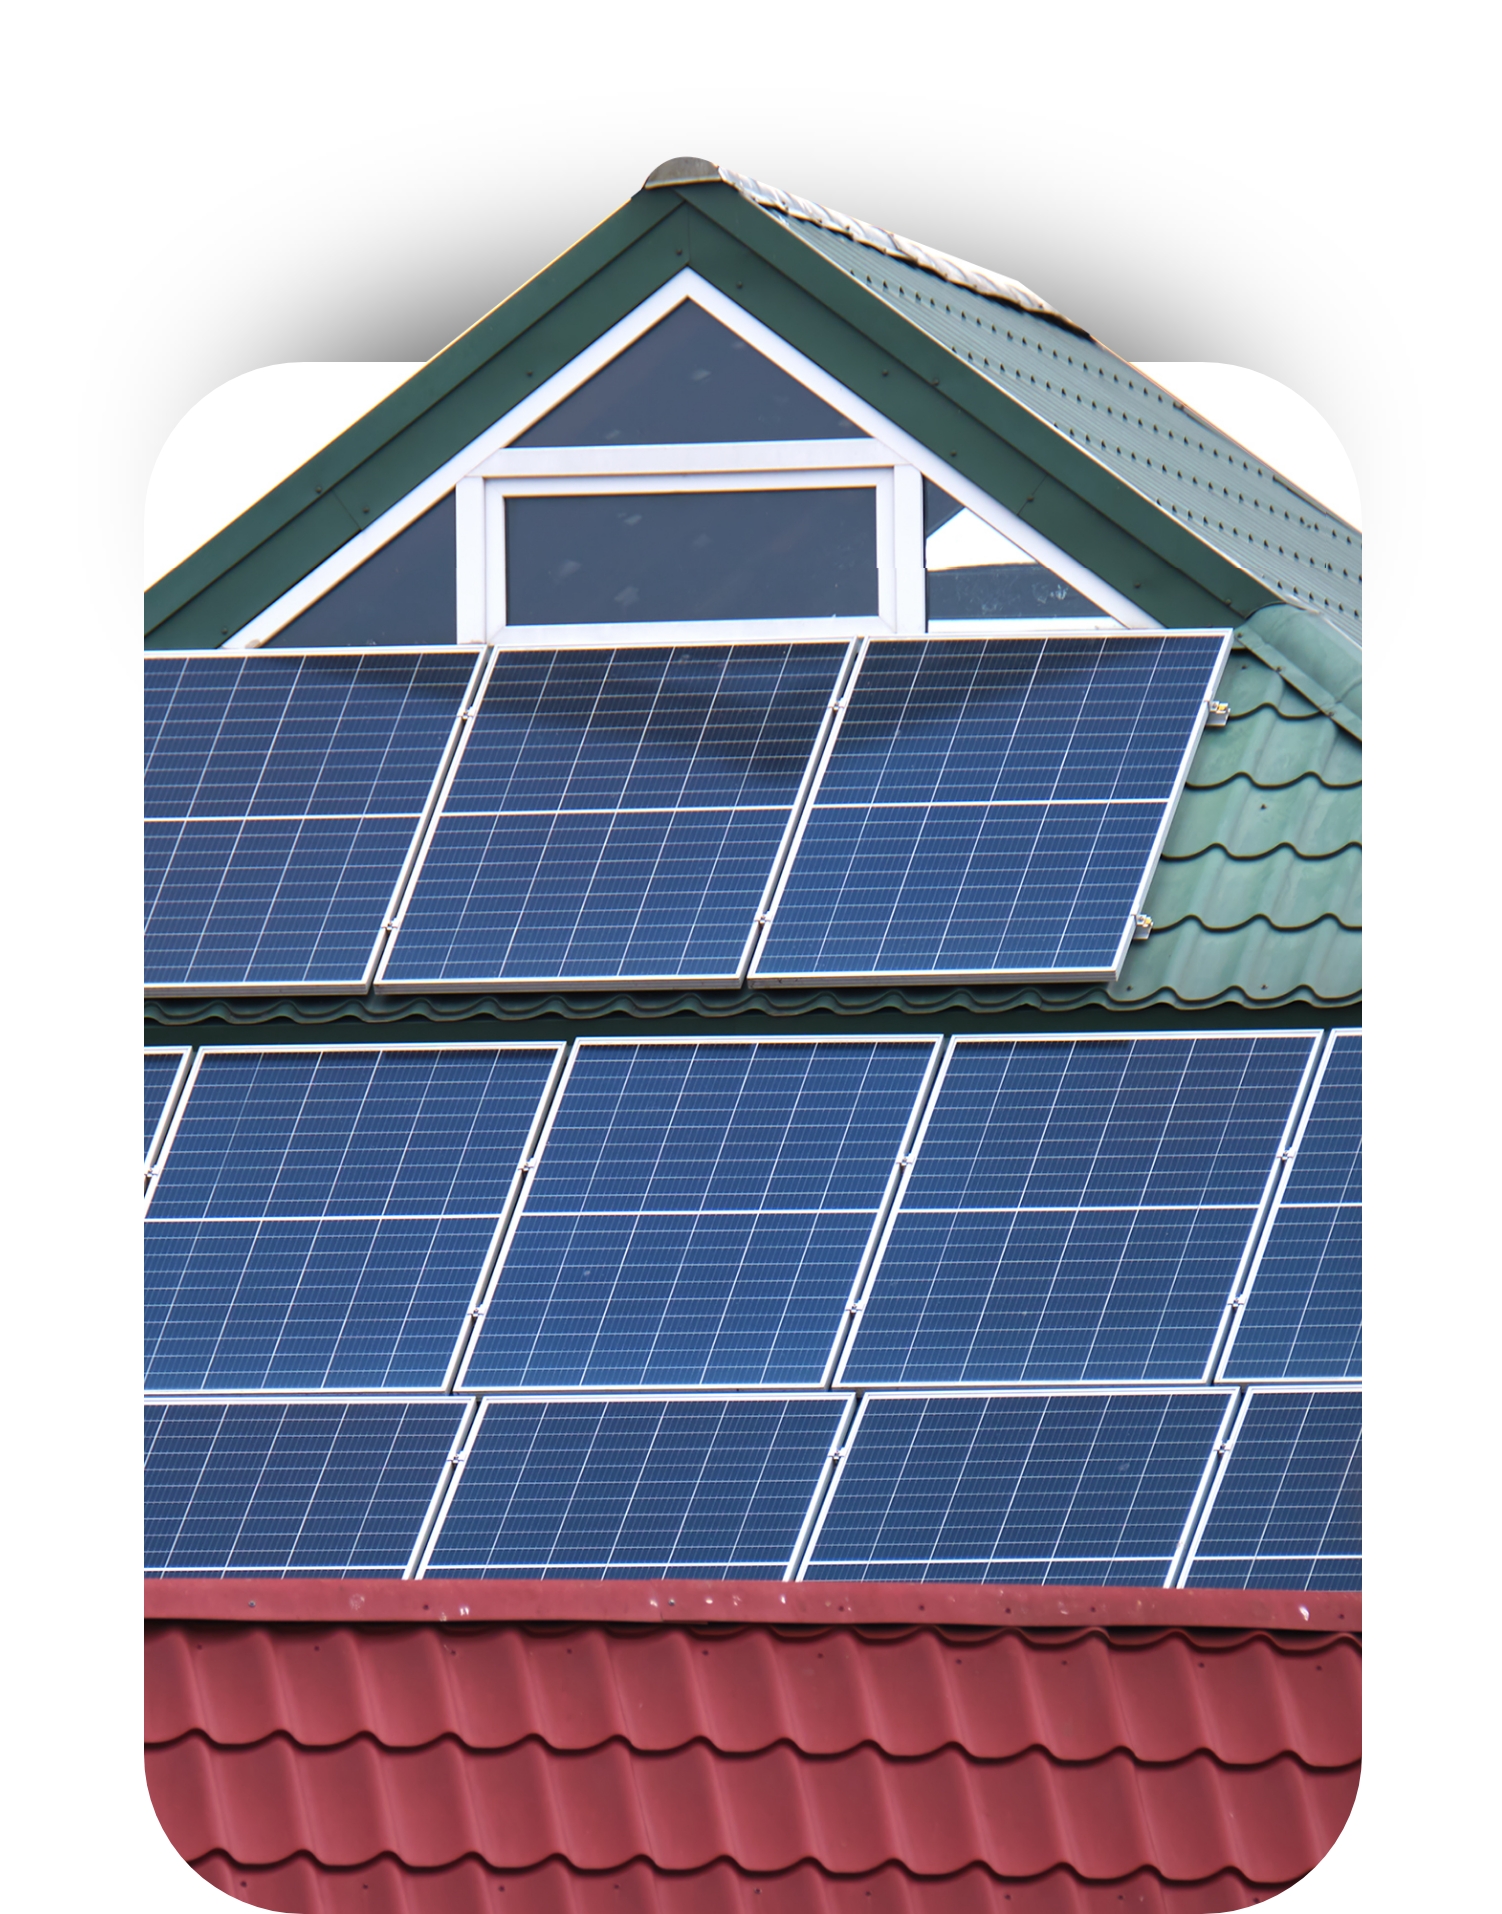 From the Federal Solar Tax Credit to savings on your energy bill, choosing Solar by Peak to Peak as your solar installer is an important consideration you won't regret.